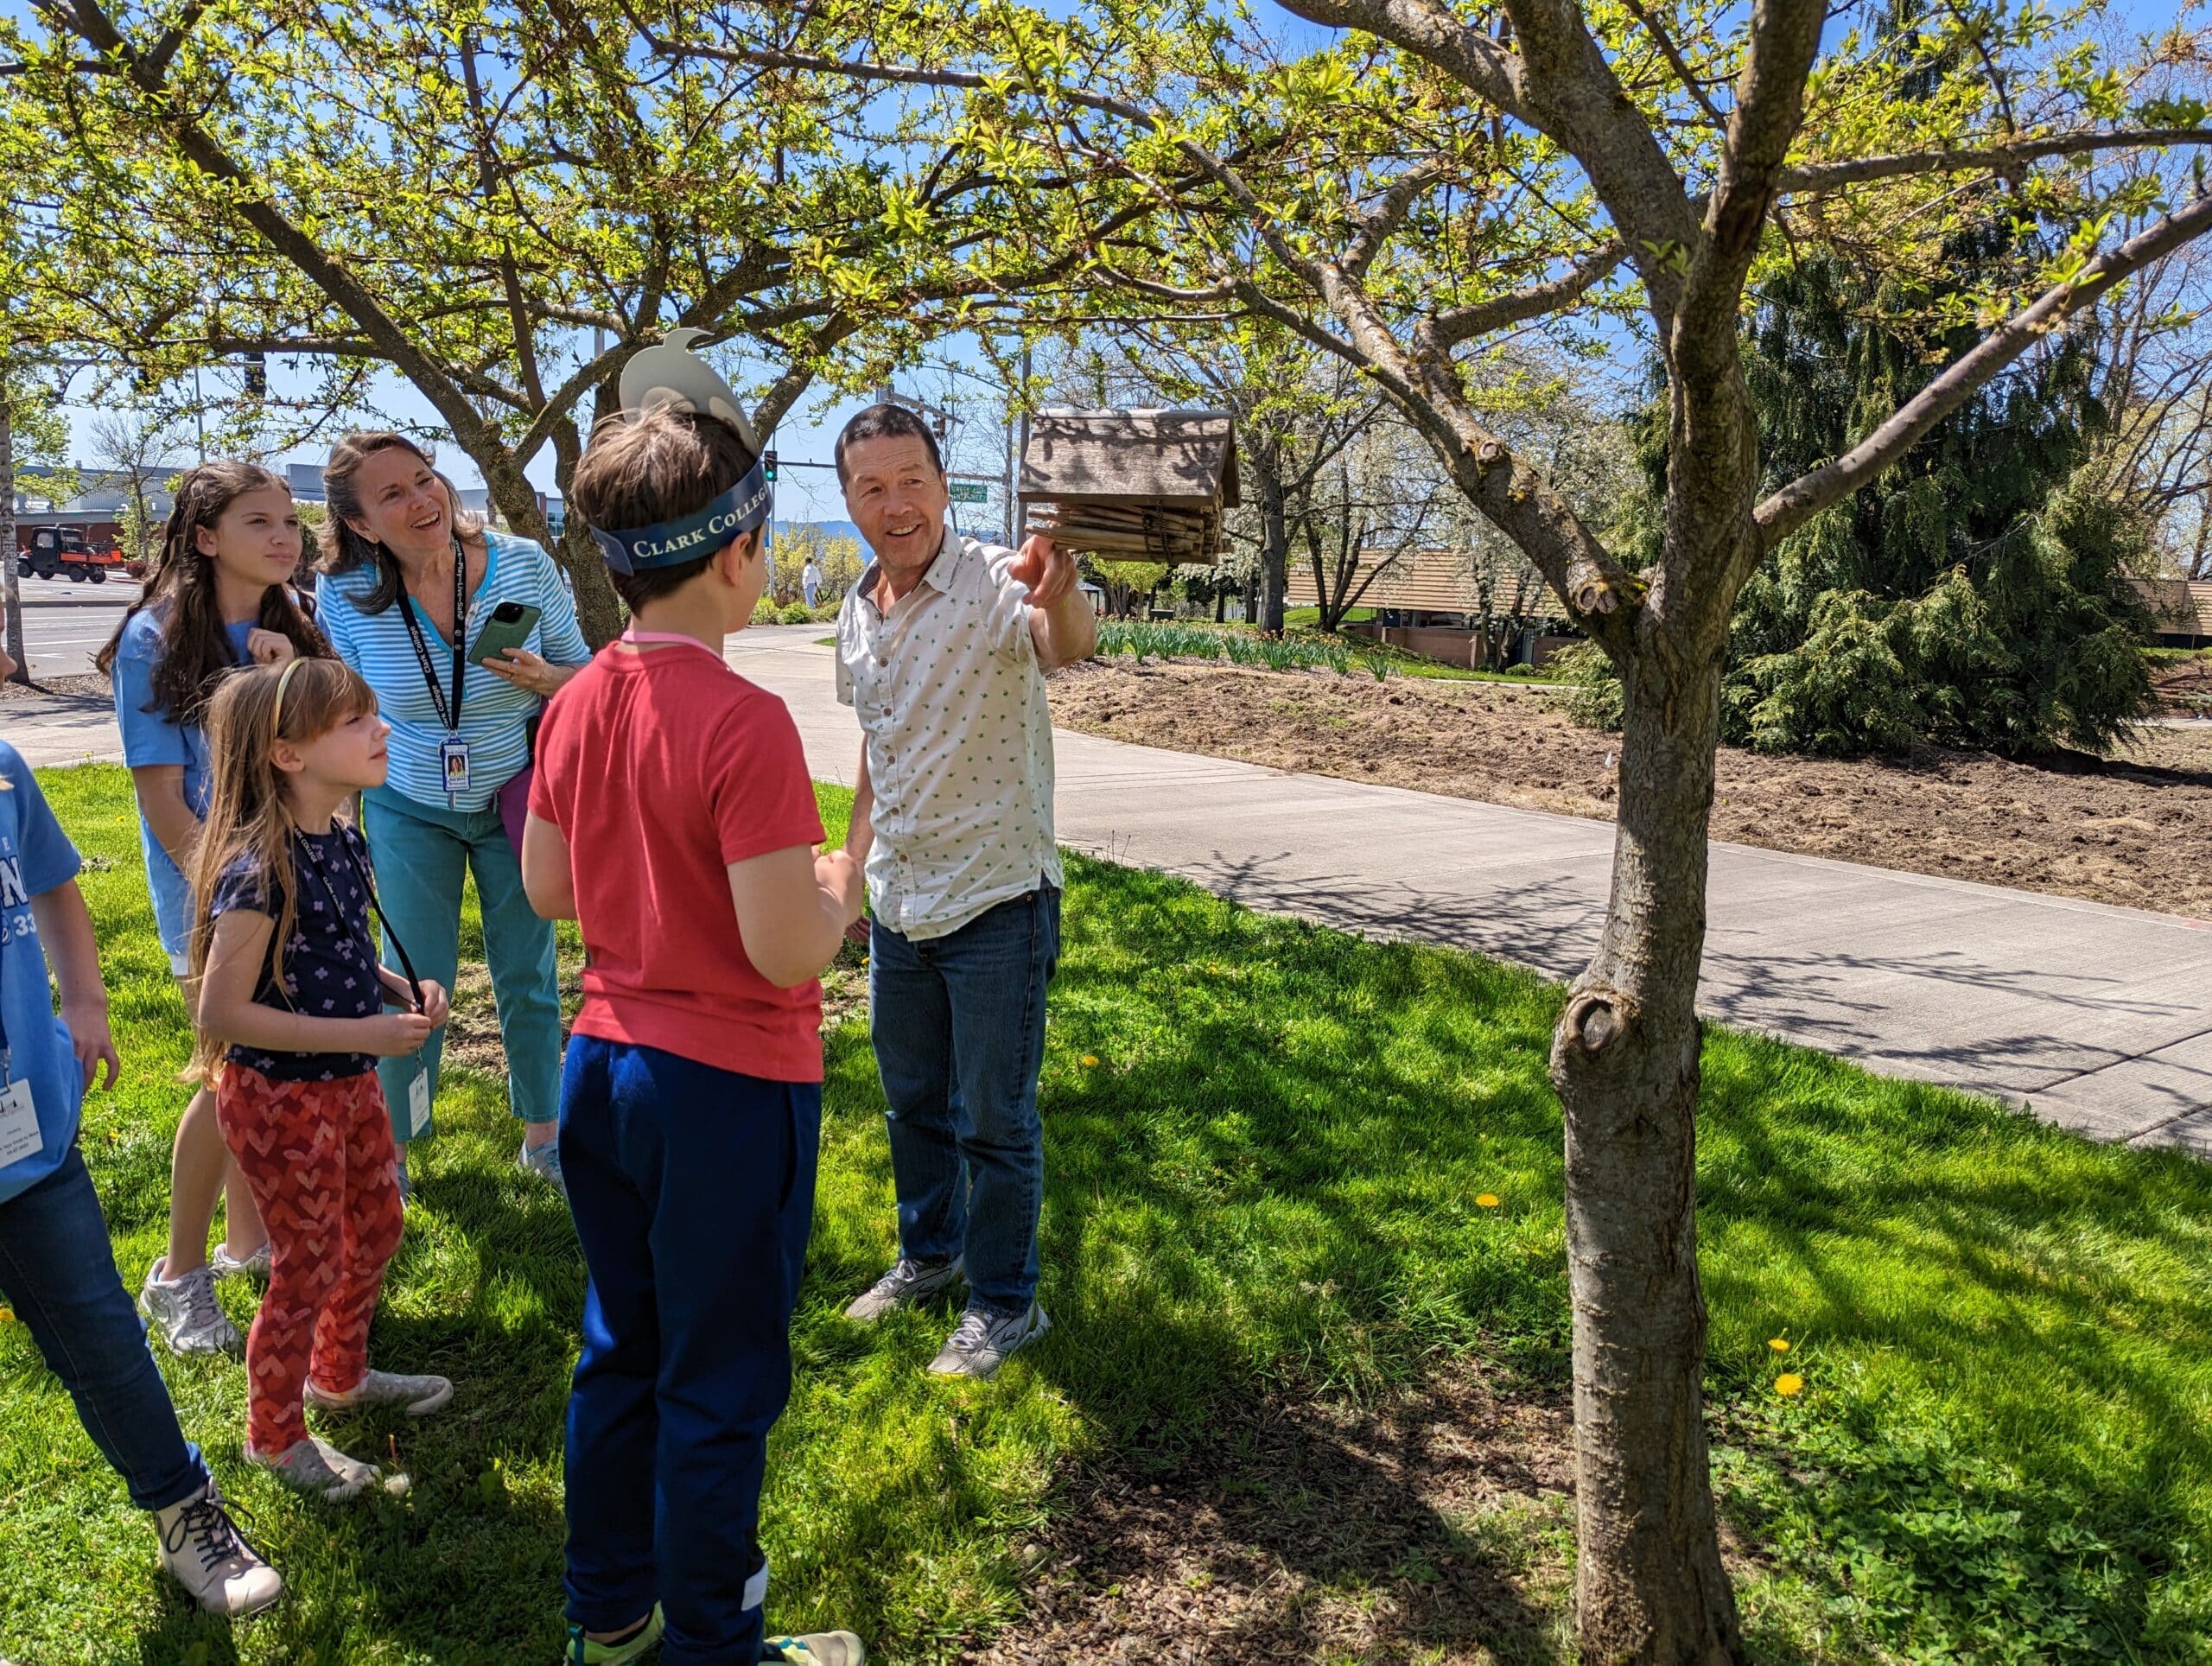 A man points to a tree while instructing several other people outdoors